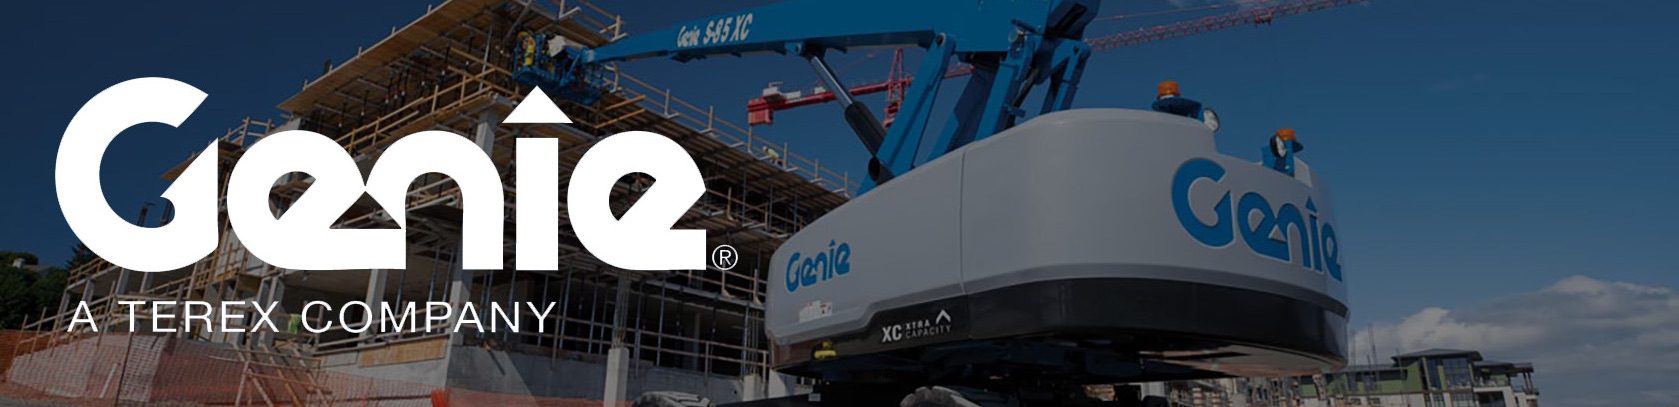 genie boom and scissor lifts in chattanooga and knoxville, tn and london, ky